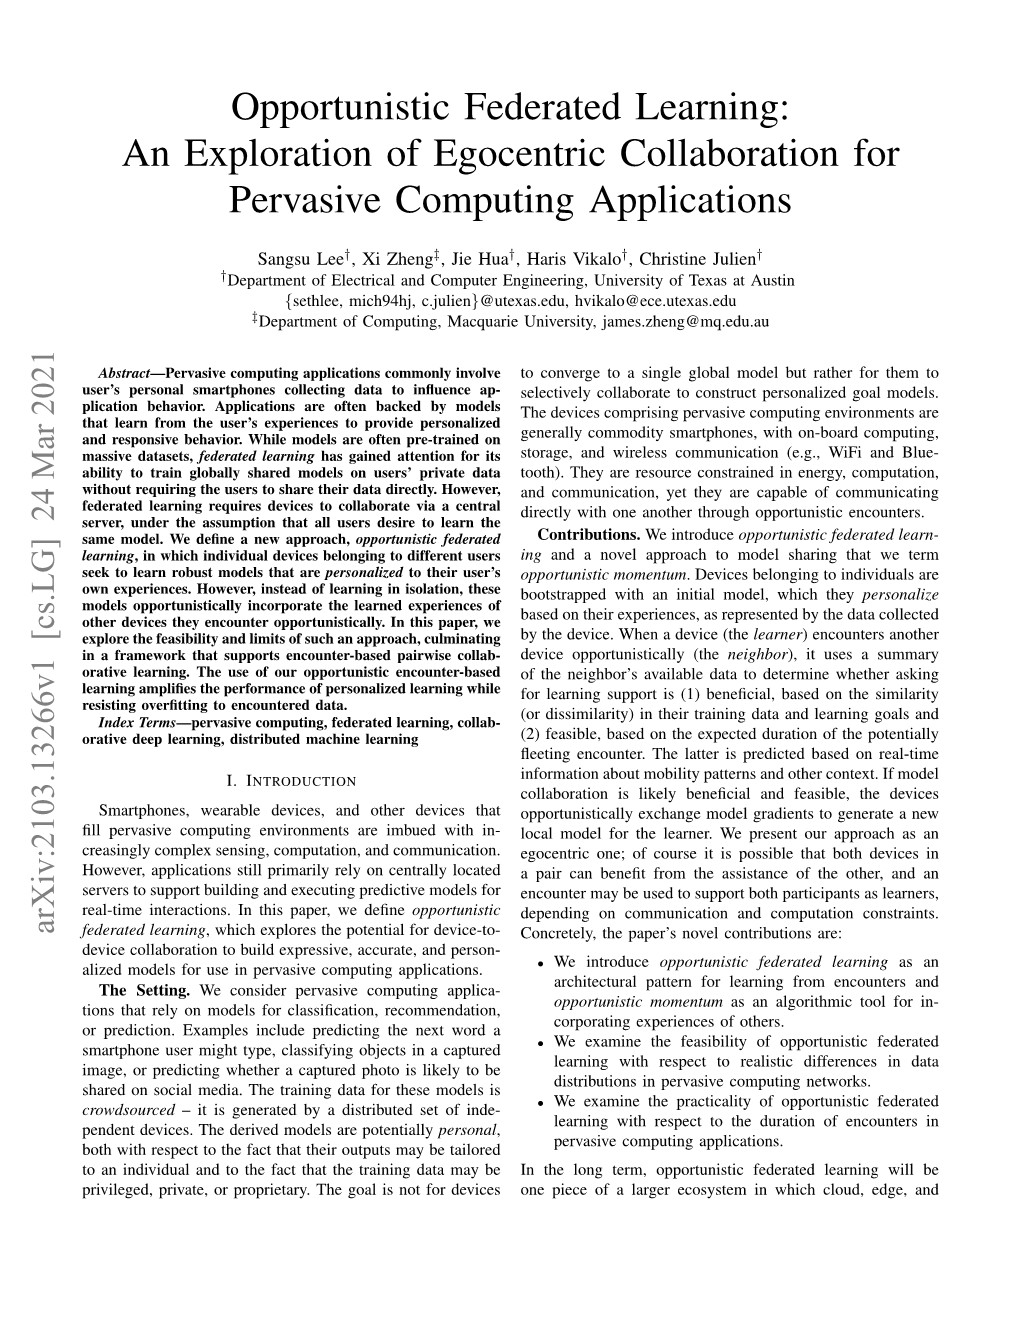 Opportunistic Federated Learning: an Exploration of Egocentric Collaboration for Pervasive Computing Applications